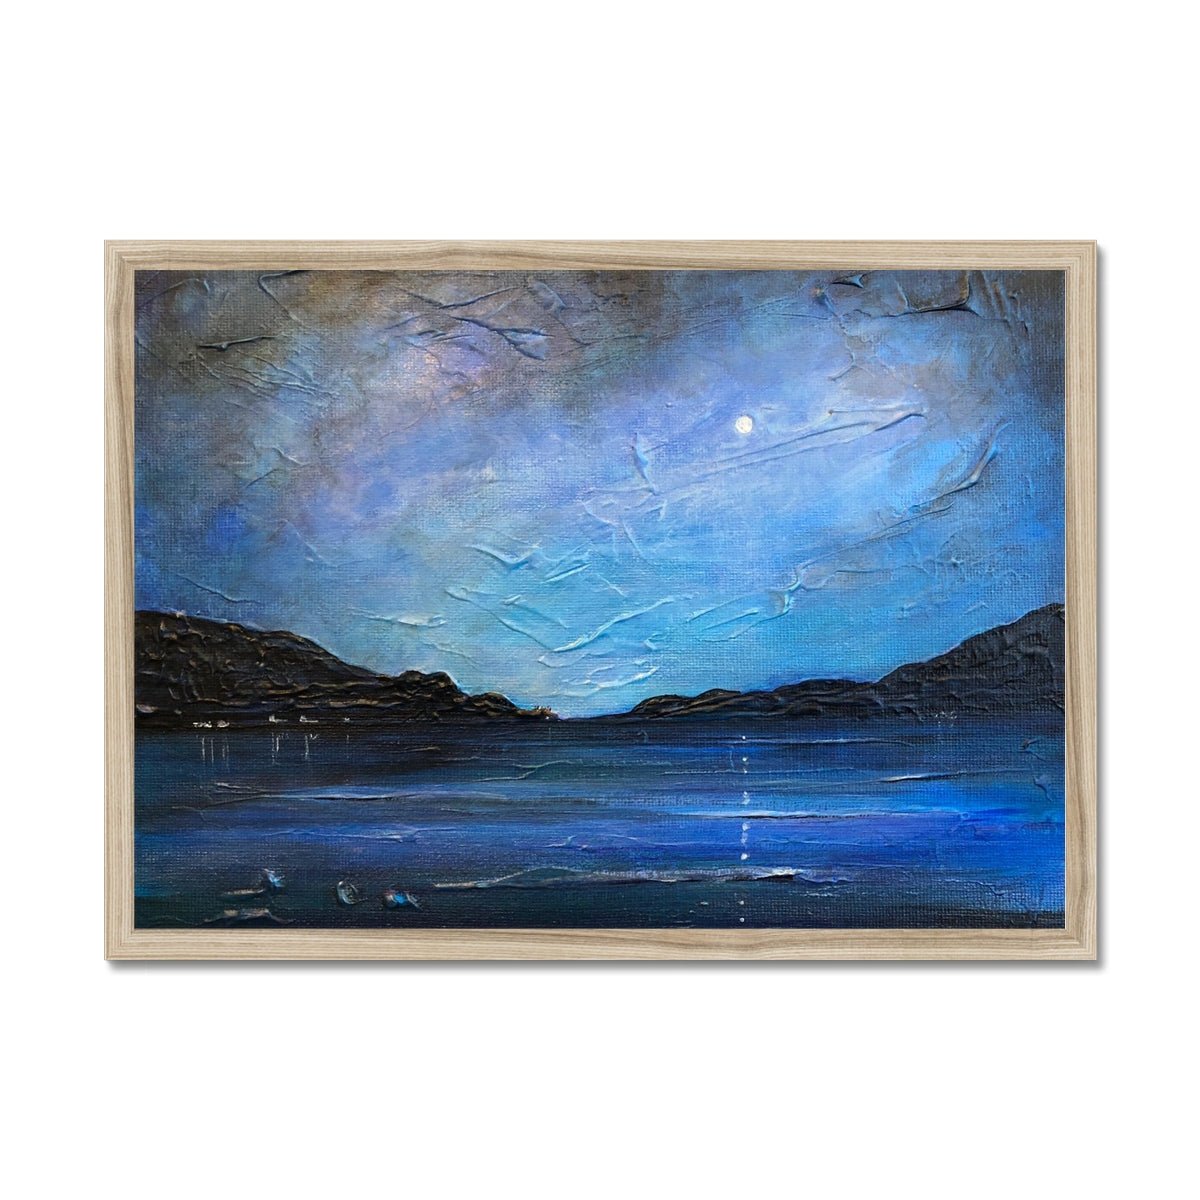 Loch Ness Moonlight Painting | Framed Prints From Scotland-Framed Prints-Scottish Lochs & Mountains Art Gallery-A2 Landscape-Natural Frame-Paintings, Prints, Homeware, Art Gifts From Scotland By Scottish Artist Kevin Hunter